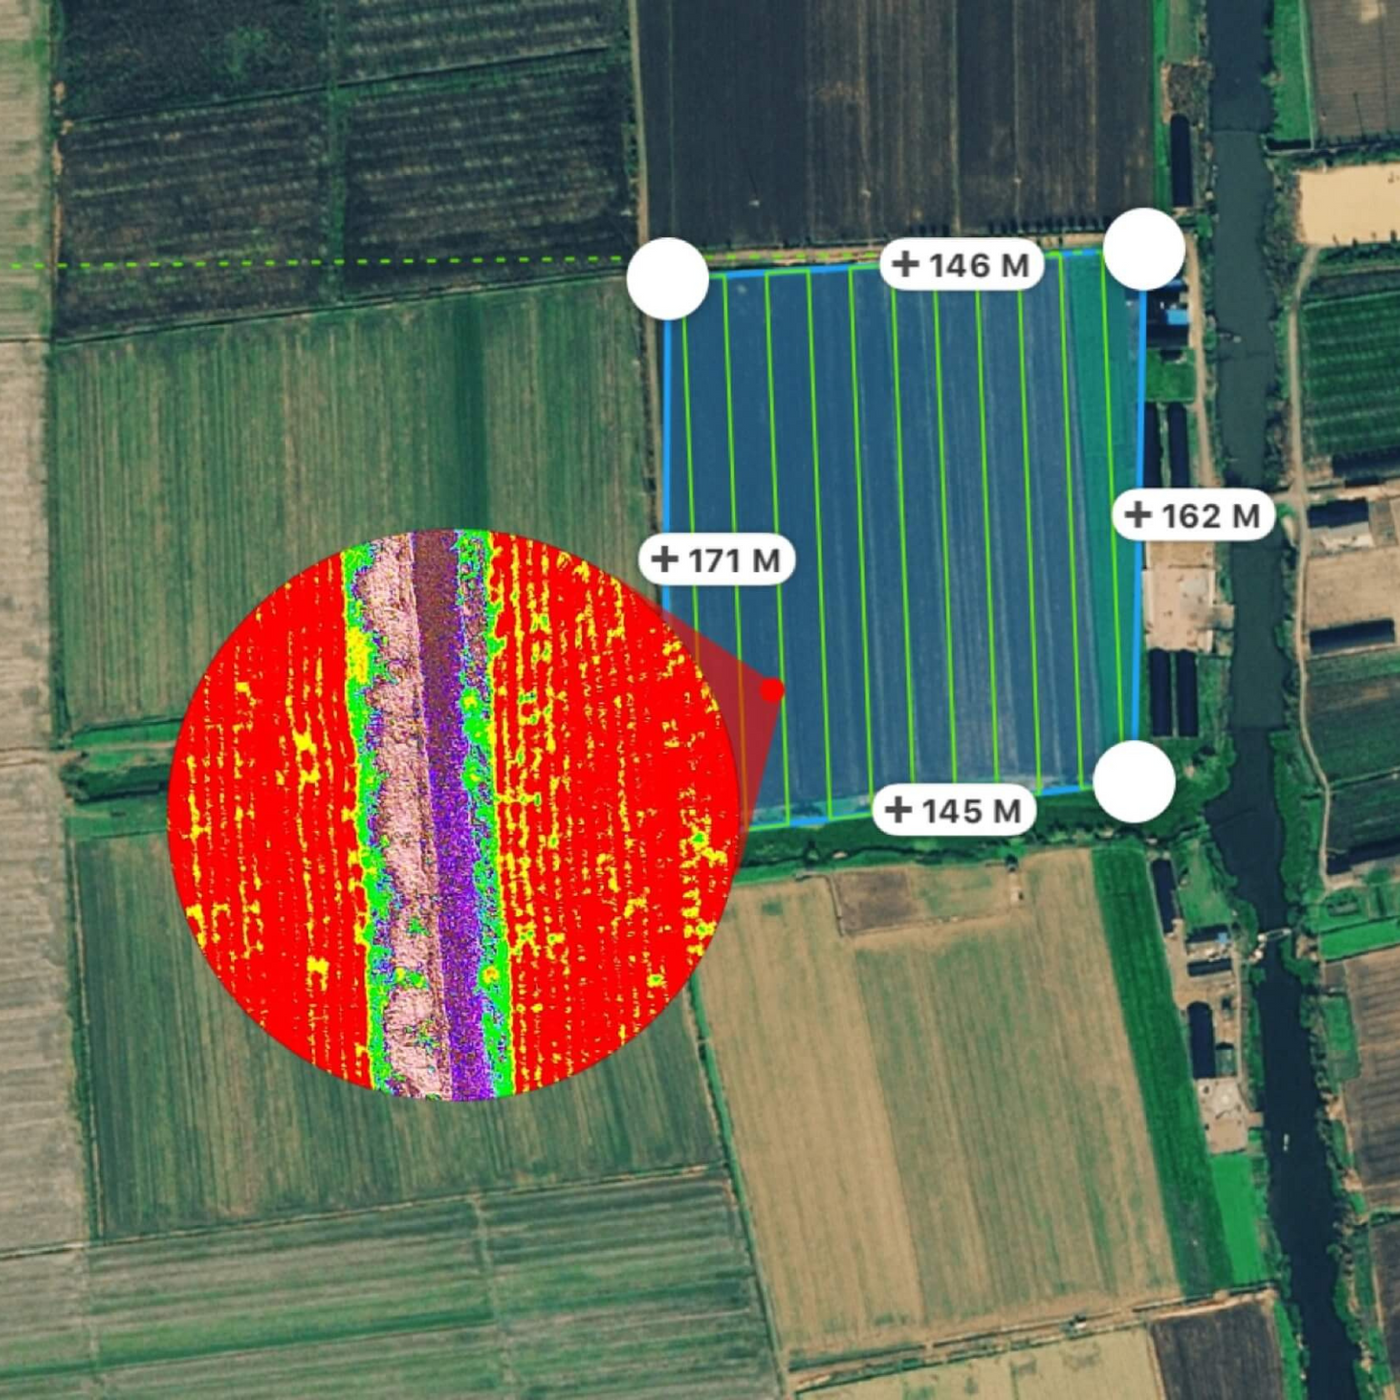 Using drones for multispectral imagery.